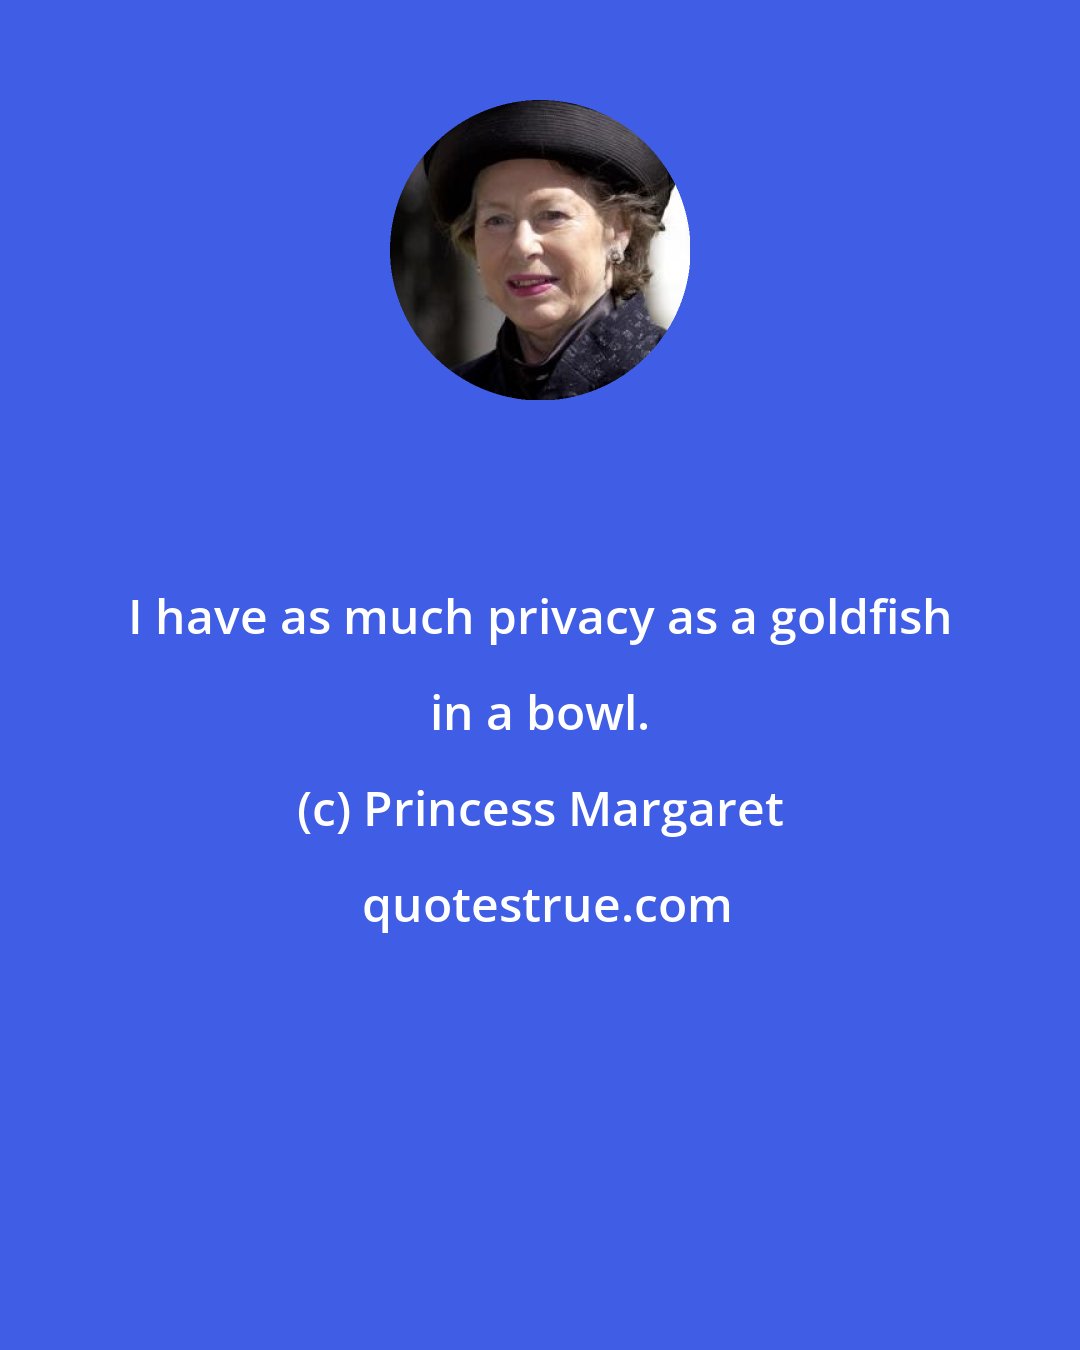 Princess Margaret: I have as much privacy as a goldfish in a bowl.